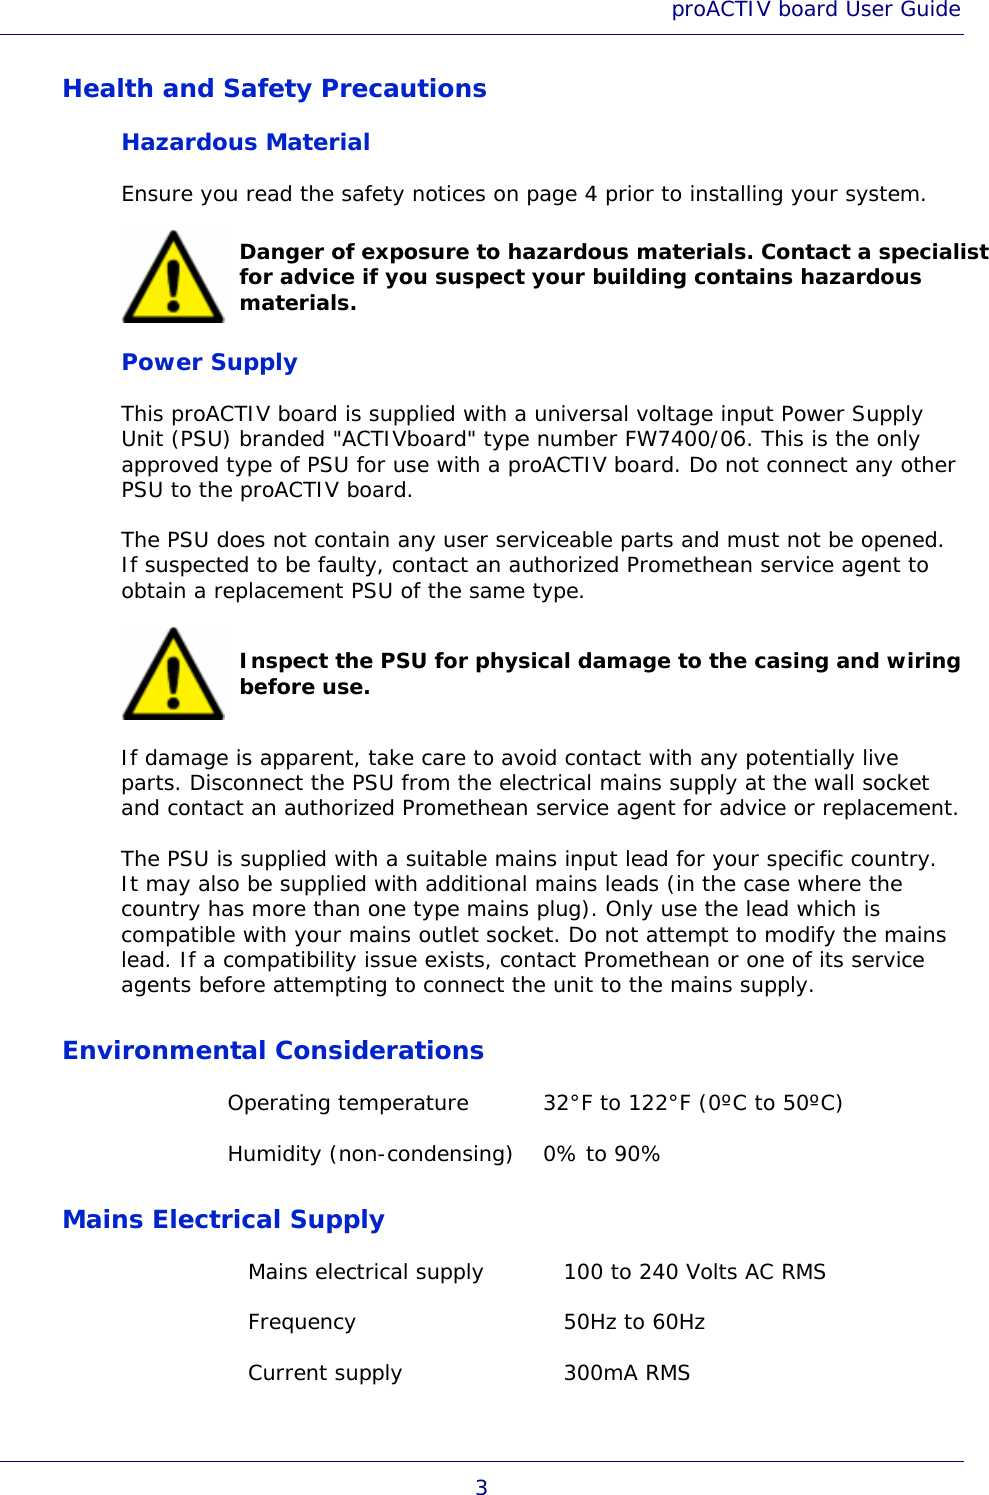 proACTIV board User Guide 3 Health and Safety Precautions Hazardous Material Ensure you read the safety notices on page 4 prior to installing your system.  Danger of exposure to hazardous materials. Contact a specialist for advice if you suspect your building contains hazardous materials. Power Supply This proACTIV board is supplied with a universal voltage input Power Supply Unit (PSU) branded &quot;ACTIVboard&quot; type number FW7400/06. This is the only approved type of PSU for use with a proACTIV board. Do not connect any other PSU to the proACTIV board. The PSU does not contain any user serviceable parts and must not be opened. If suspected to be faulty, contact an authorized Promethean service agent to obtain a replacement PSU of the same type.  Inspect the PSU for physical damage to the casing and wiring before use. If damage is apparent, take care to avoid contact with any potentially live parts. Disconnect the PSU from the electrical mains supply at the wall socket and contact an authorized Promethean service agent for advice or replacement. The PSU is supplied with a suitable mains input lead for your specific country. It may also be supplied with additional mains leads (in the case where the country has more than one type mains plug). Only use the lead which is compatible with your mains outlet socket. Do not attempt to modify the mains lead. If a compatibility issue exists, contact Promethean or one of its service agents before attempting to connect the unit to the mains supply. Environmental Considerations Operating temperature  32°F to 122°F (0ºC to 50ºC) Humidity (non-condensing)  0% to 90% Mains Electrical Supply Mains electrical supply  100 to 240 Volts AC RMS Frequency  50Hz to 60Hz Current supply  300mA RMS 